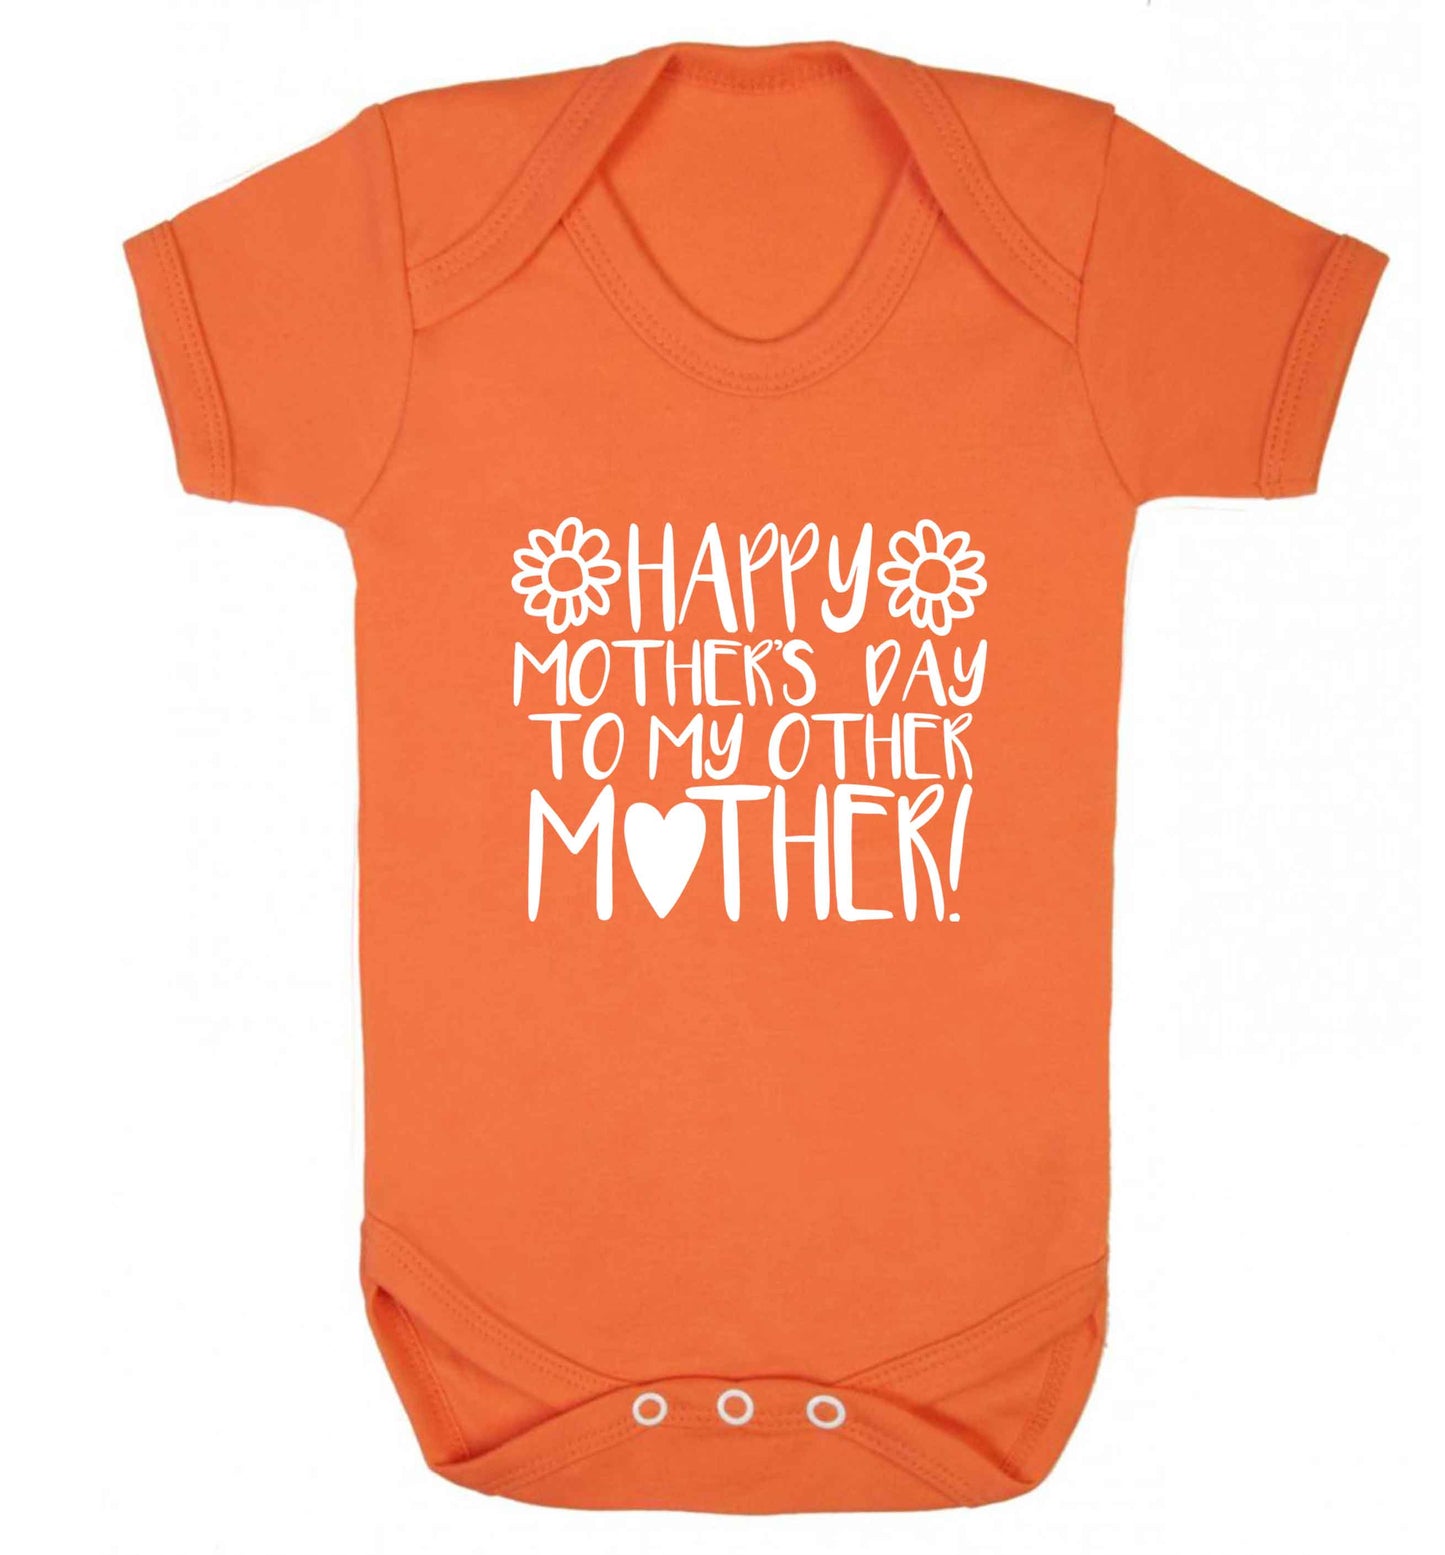 Happy mother's day to my other mother baby vest orange 18-24 months